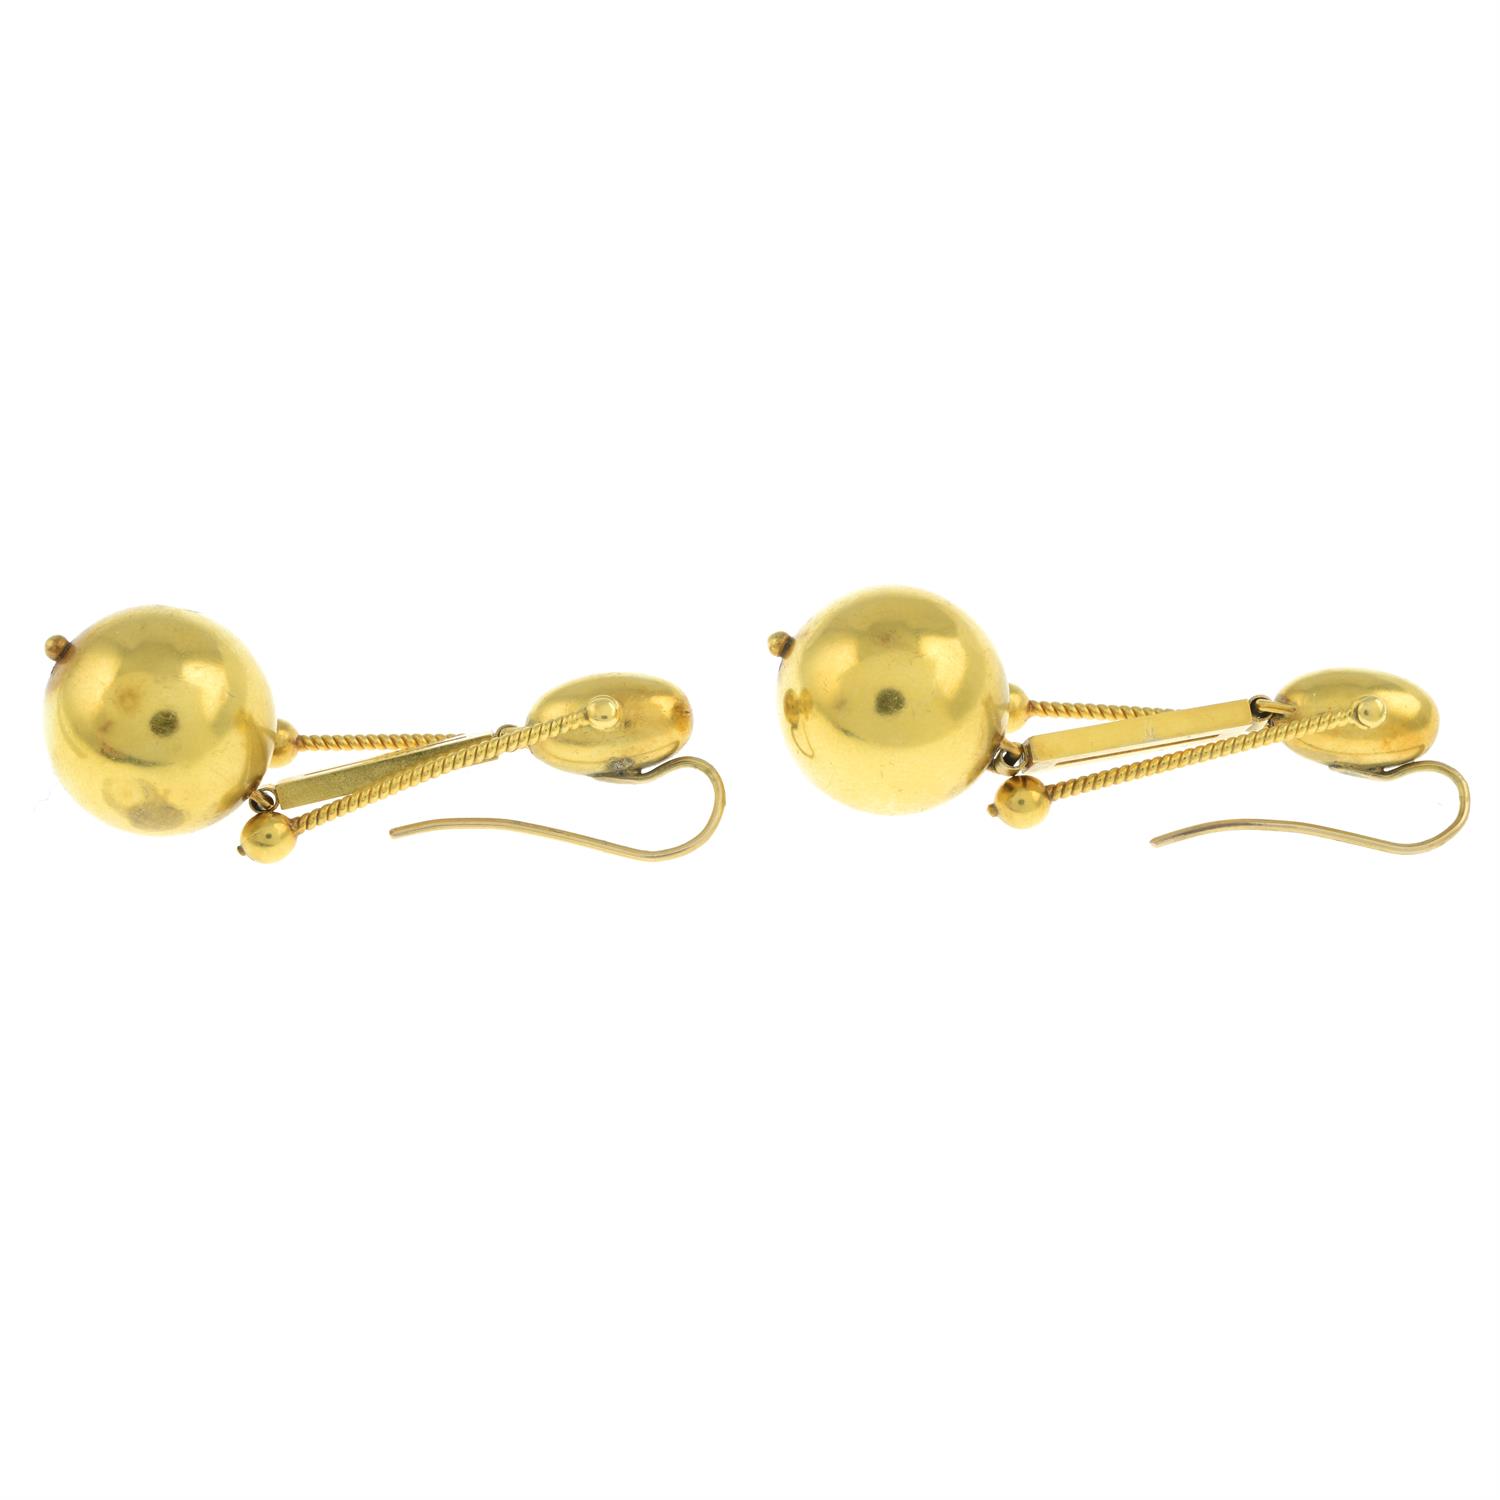 Victorian gold earrings - Image 4 of 7